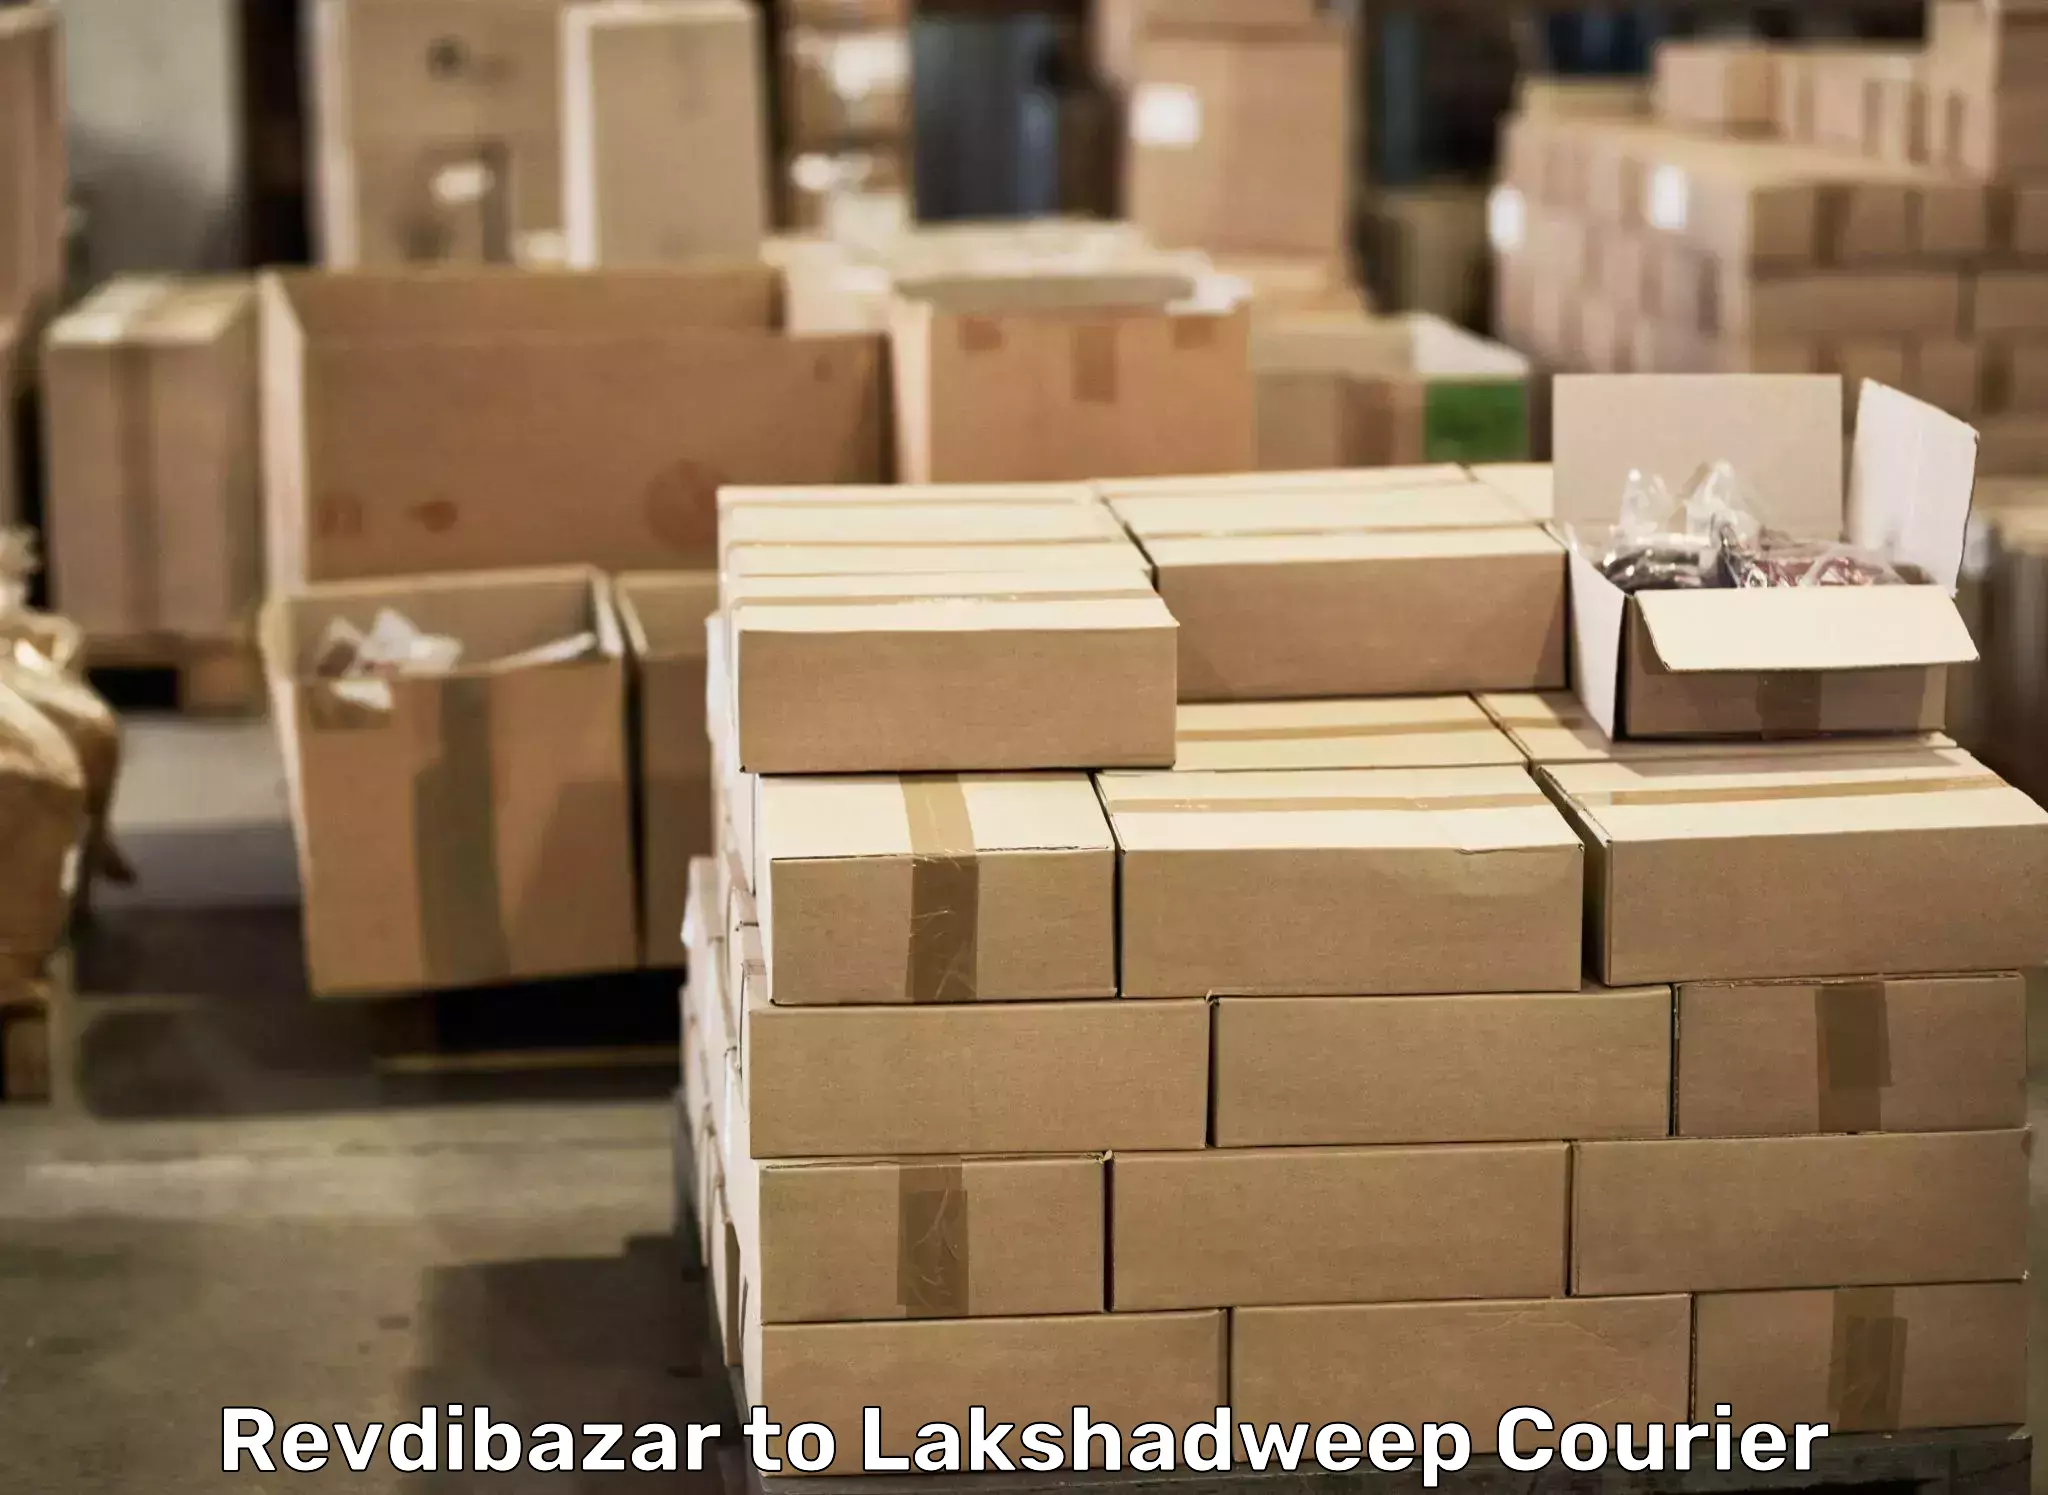 Furniture delivery service Revdibazar to Lakshadweep